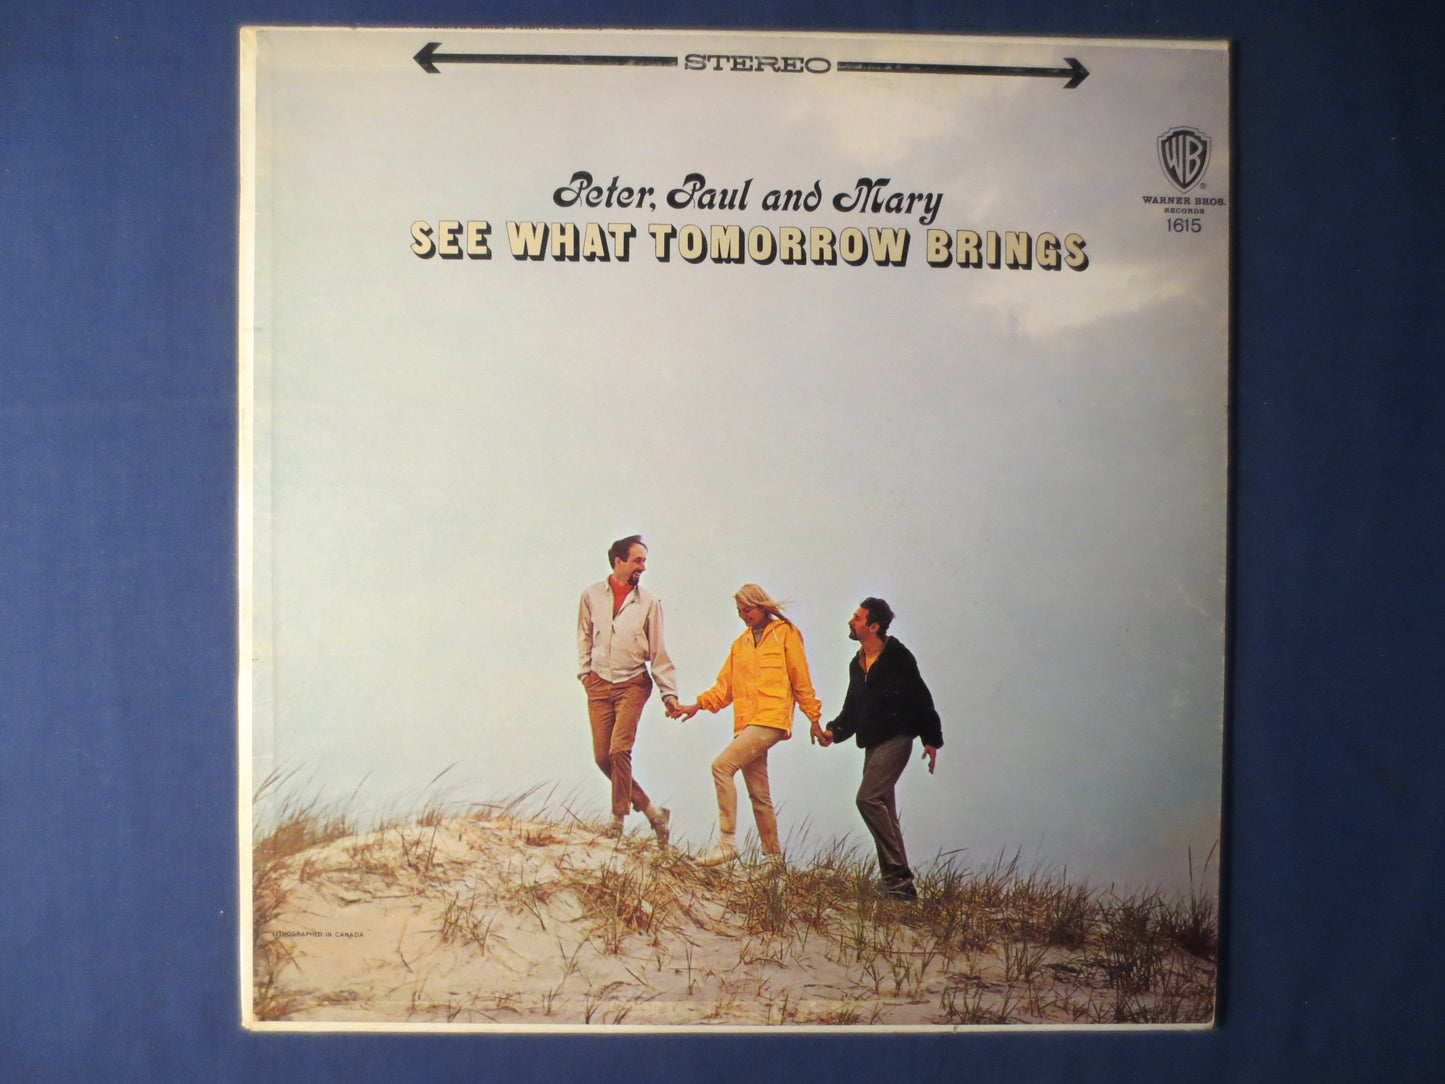 PETER PAUL and MARY, See What Tomorrow Brings, Folk Records, Vintage Vinyl, Records, Vinyl, Vinyl Records, 1965 Records